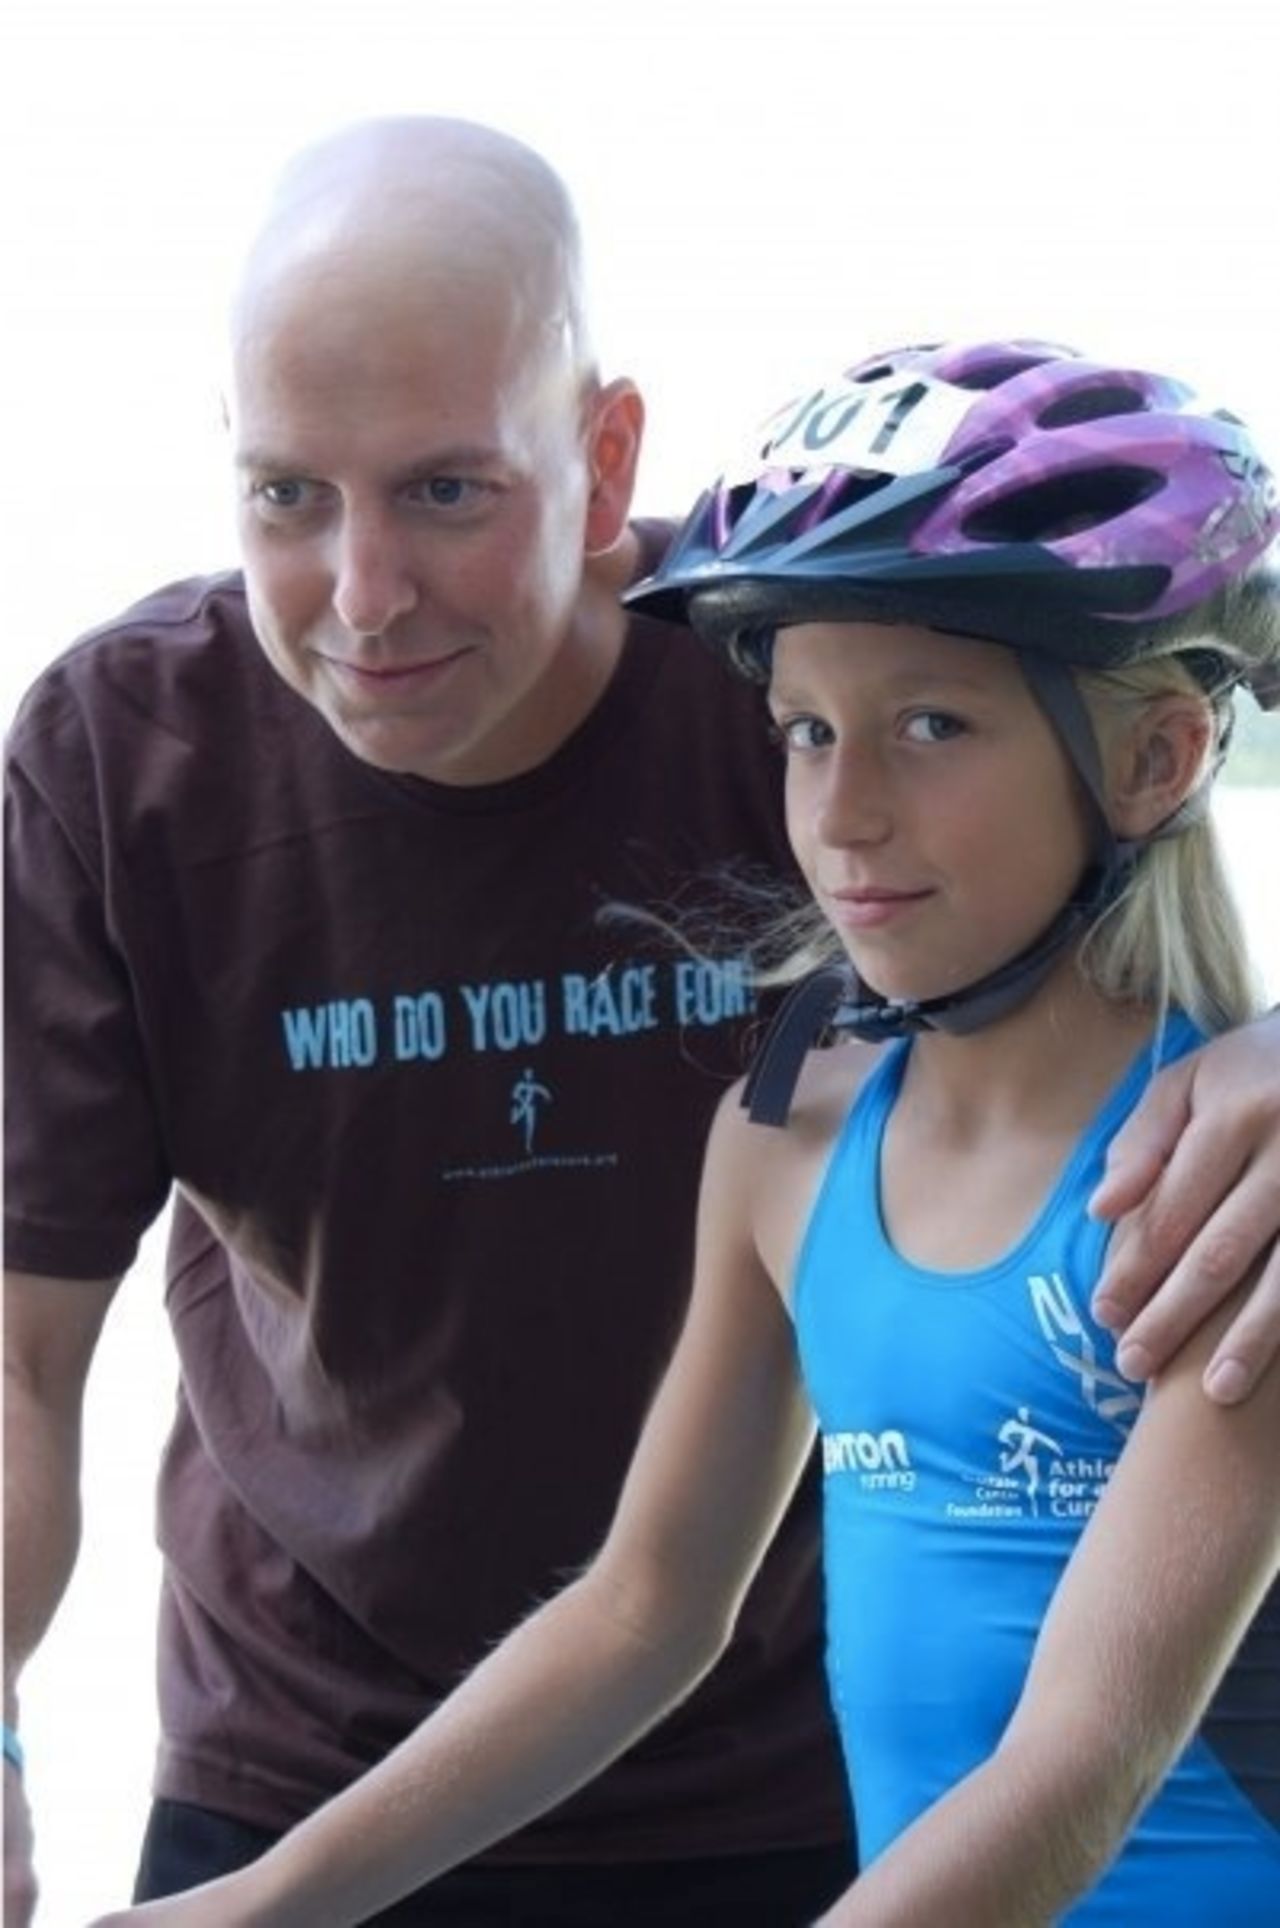 Winter founded the nonprofit organization <a href="http://www.teamwinter.org/" target="_blank" target="_blank">Team Winter</a> at the age of 9 after learning that her father had been diagnosed with an aggressive form of prostate cancer. Michael Vinecki died in 2009, before his 41st birthday. 